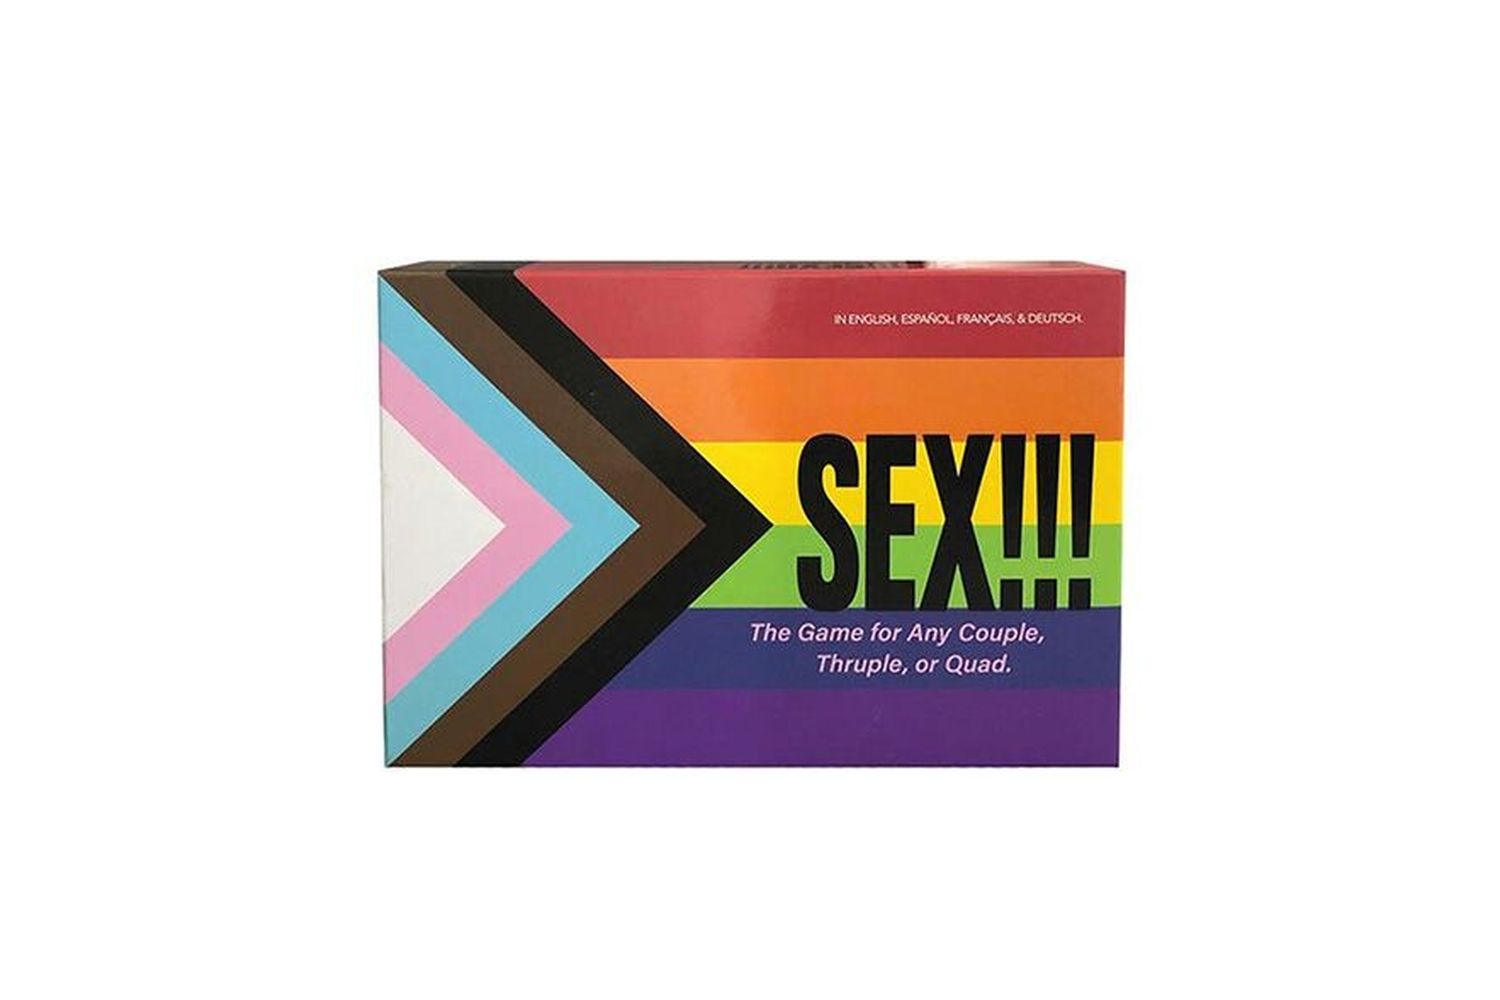 SEX!!! The Game for Any Couple, Throuple, or Quad